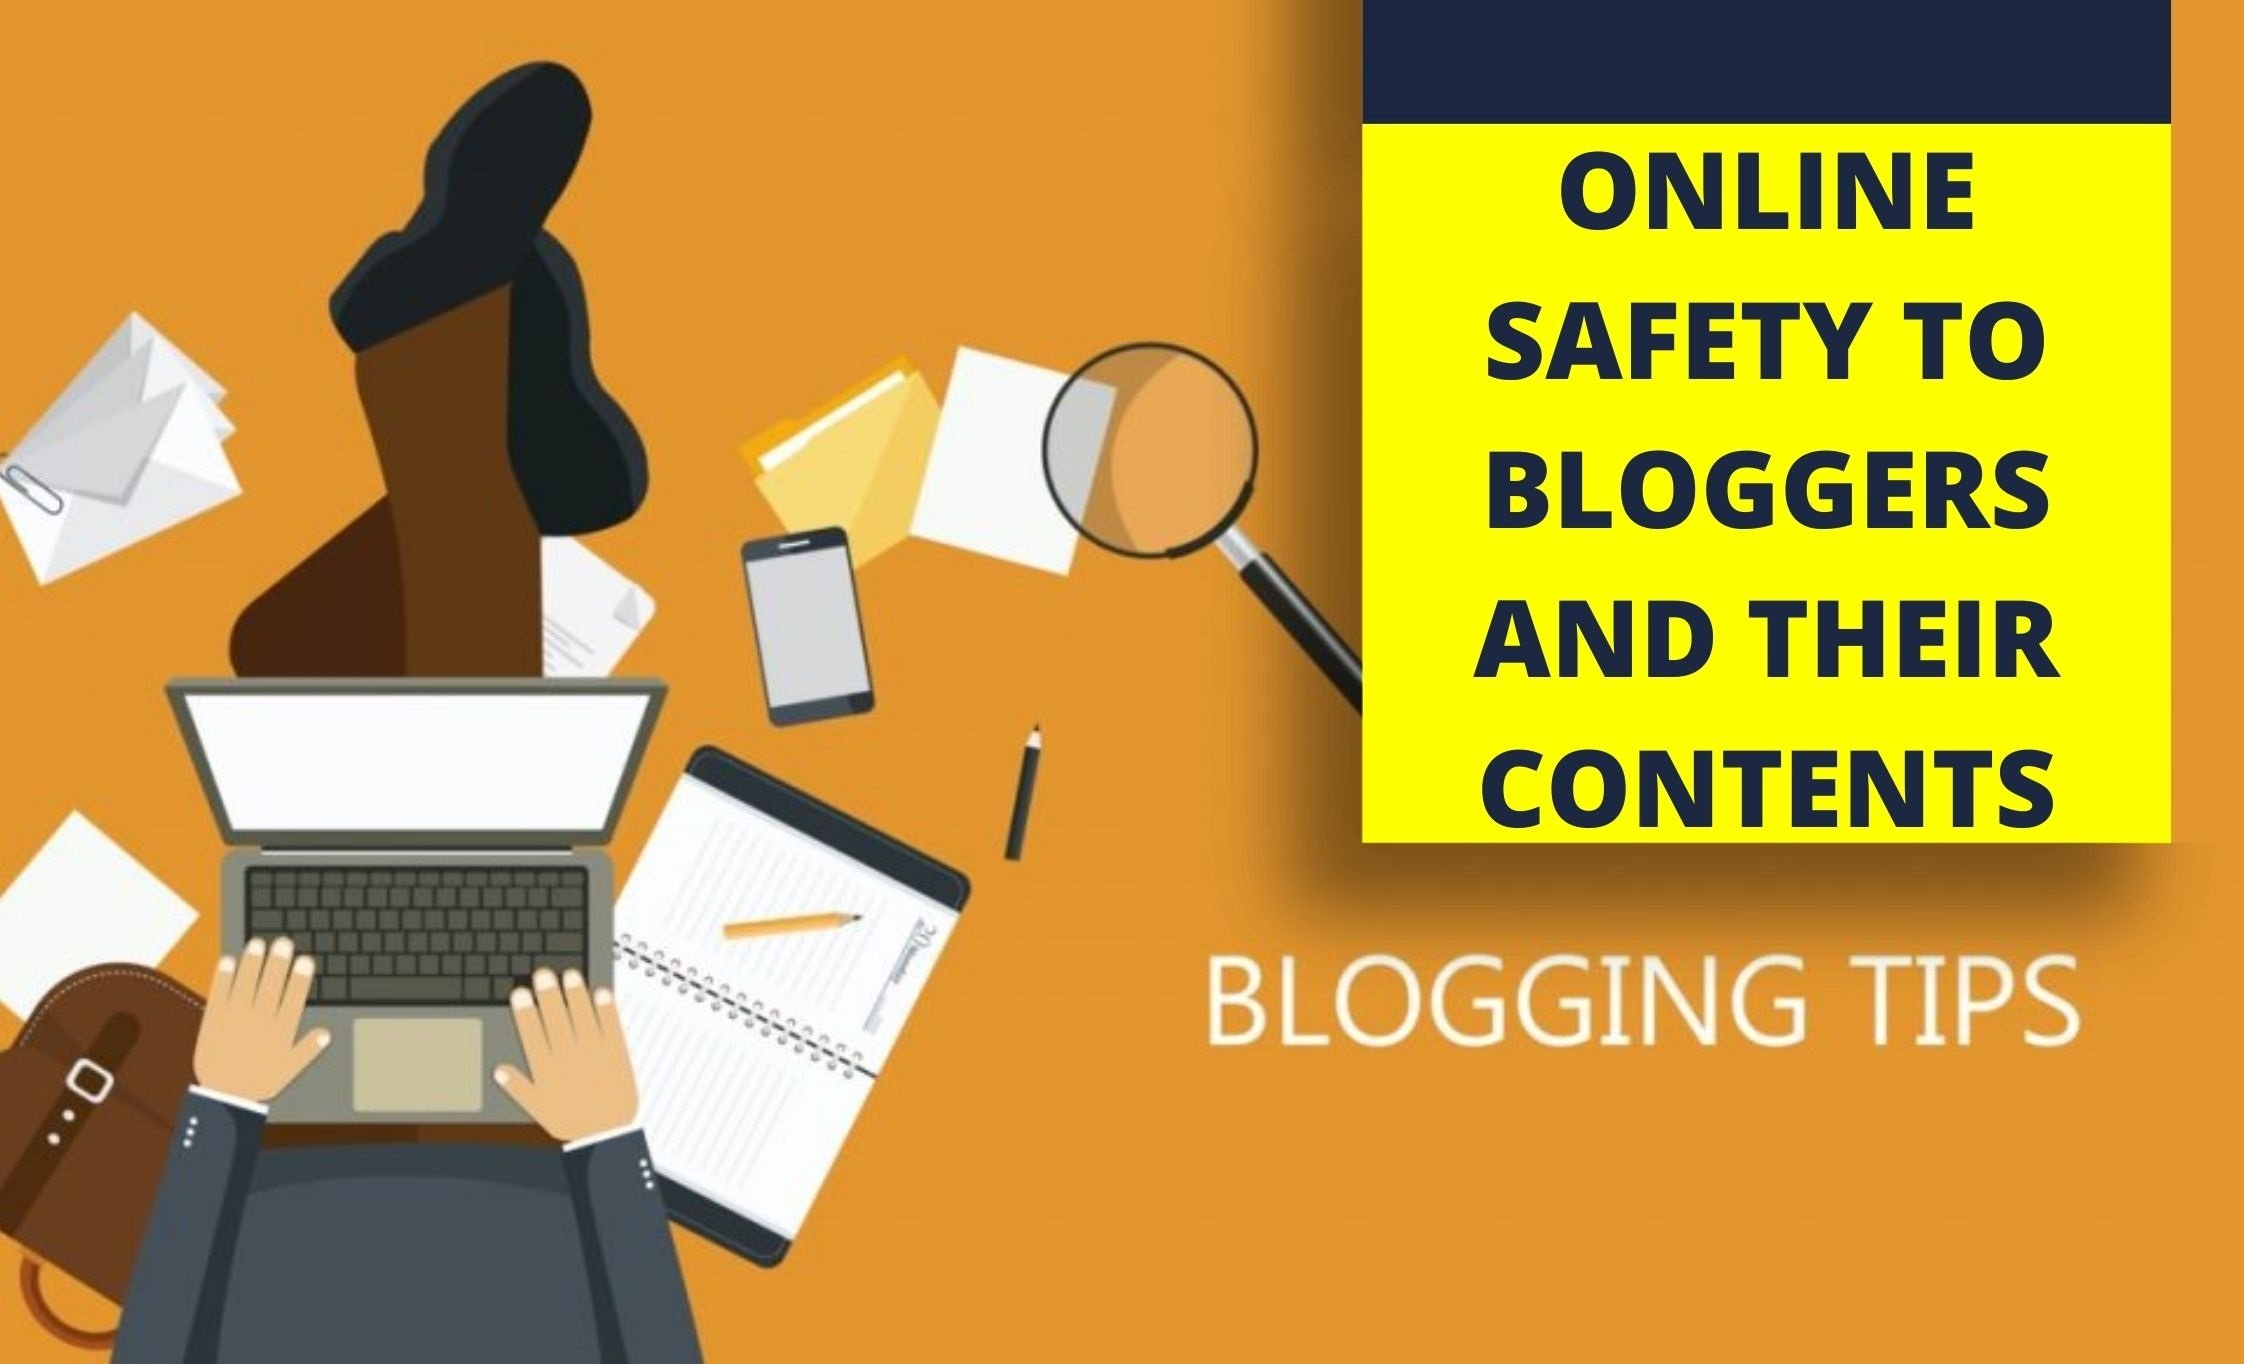 HOW BLOGGERS CAN KEEP THEMSELVES AND THEIR CONTENTS SAFE ONLINE